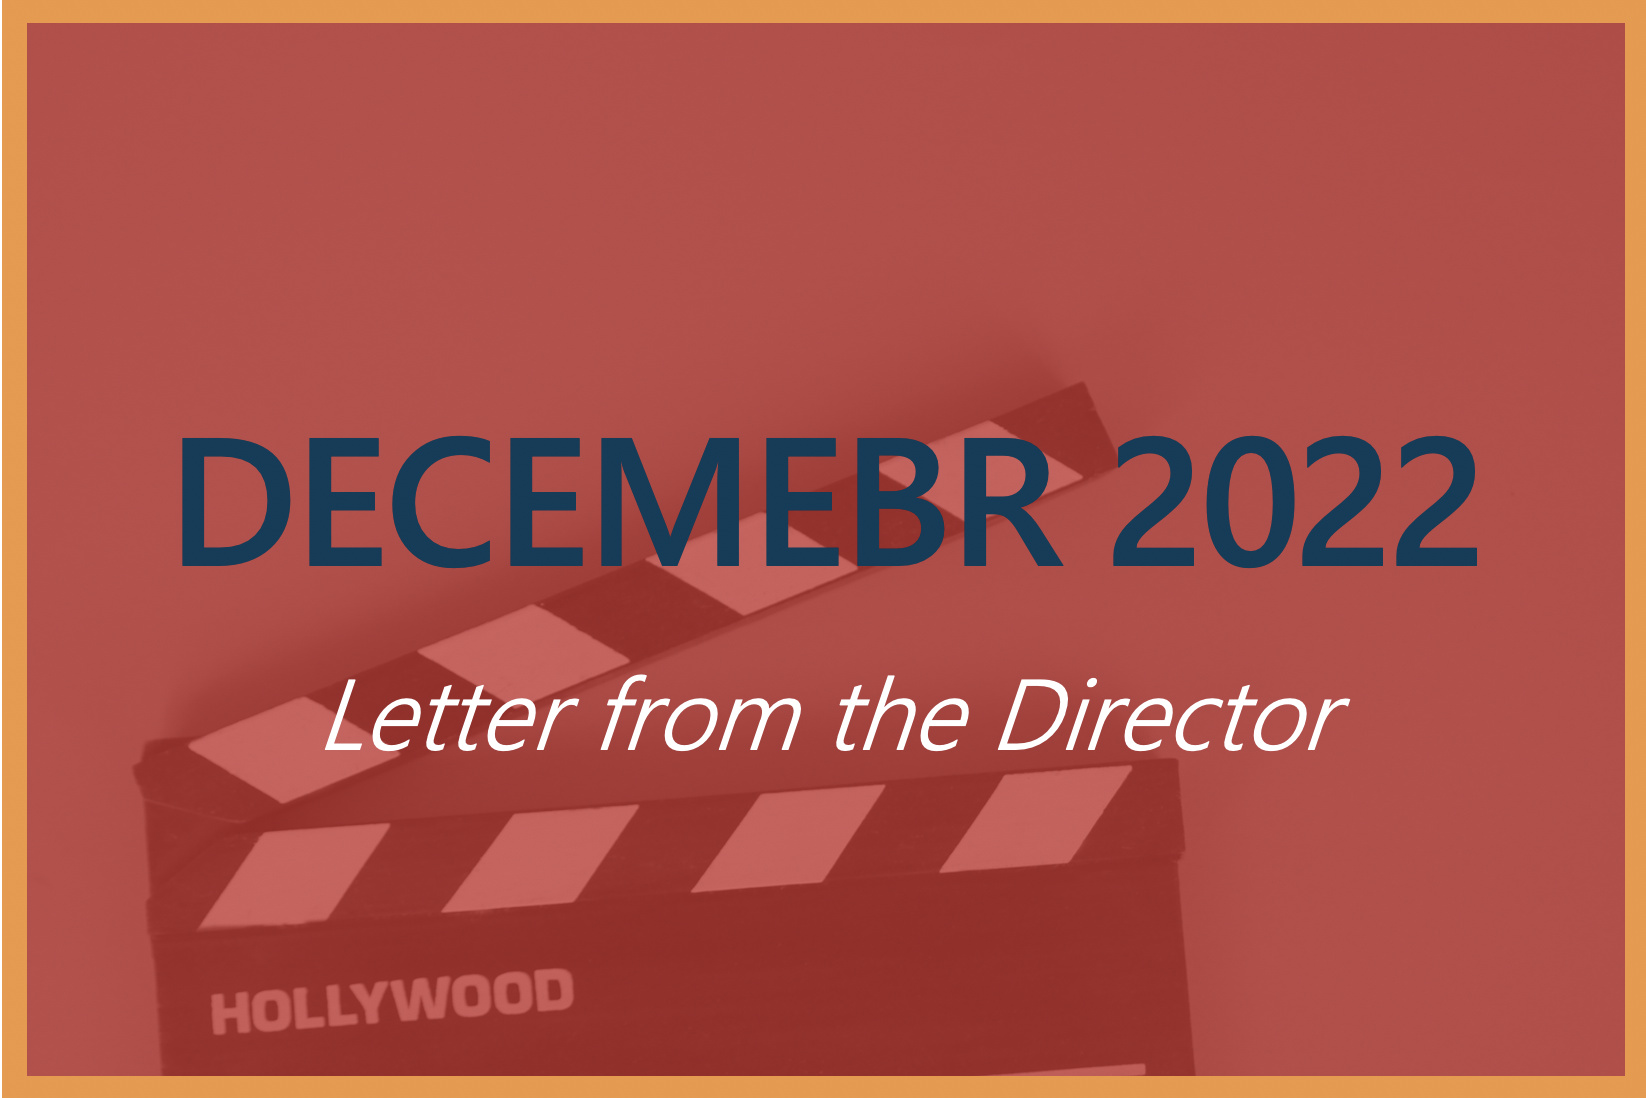 December 2022 Letter from the Director